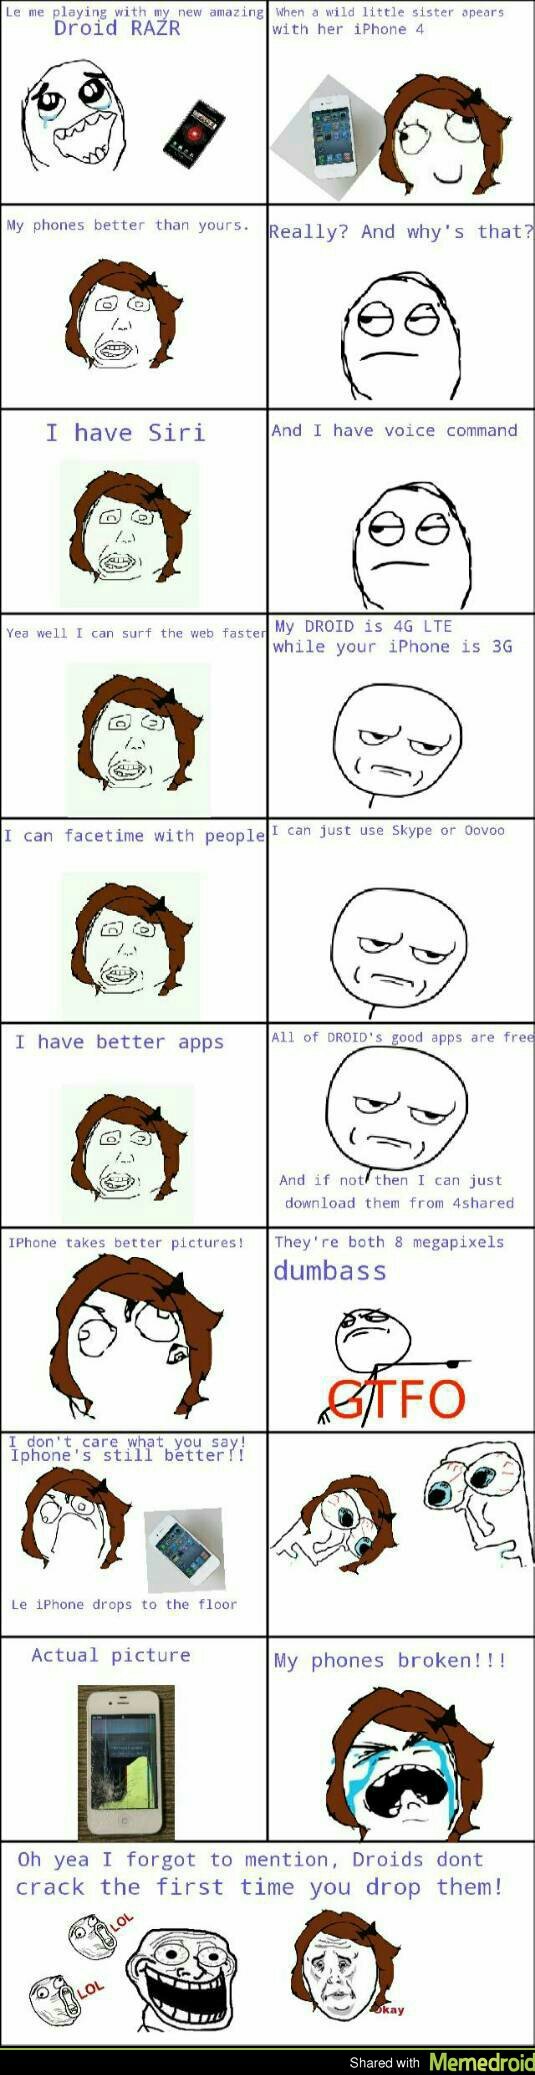 Repost from 2012 when memedroiders hated Apple users.